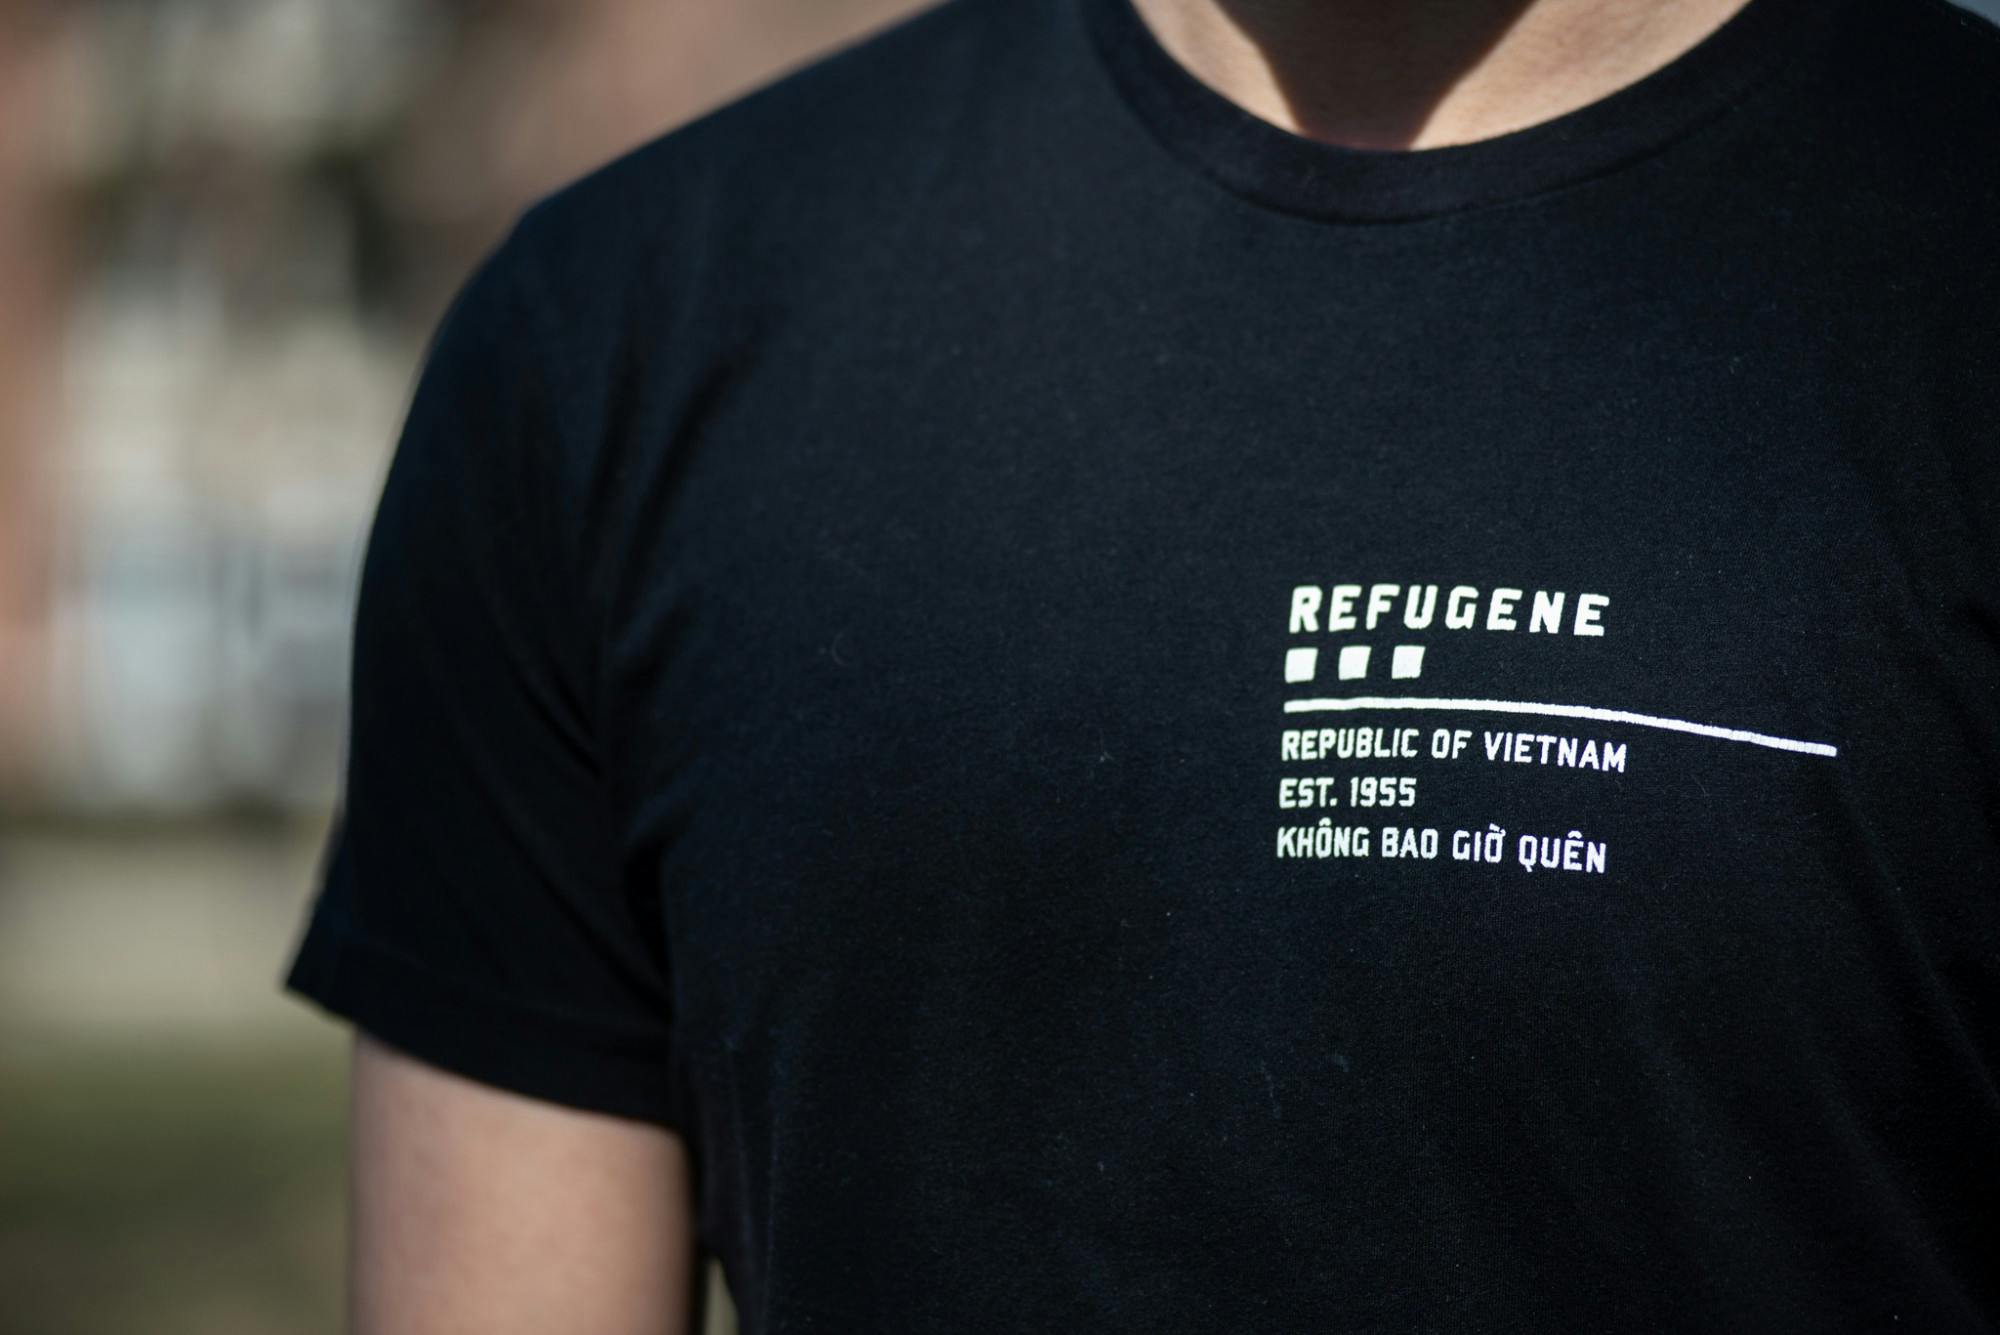 David Tran wears a shirt with the word "REFUGENE" on March 20, 2021. According to the Refugene website, "‘REFUGENE’ is the extraordinary resilience in refugees—the trait we hope to pass from generation to generation. It is in our DNA, either dominant or recessive, and therein lies our mission: Find it in yourself, look for it in others, and live by it for life.”